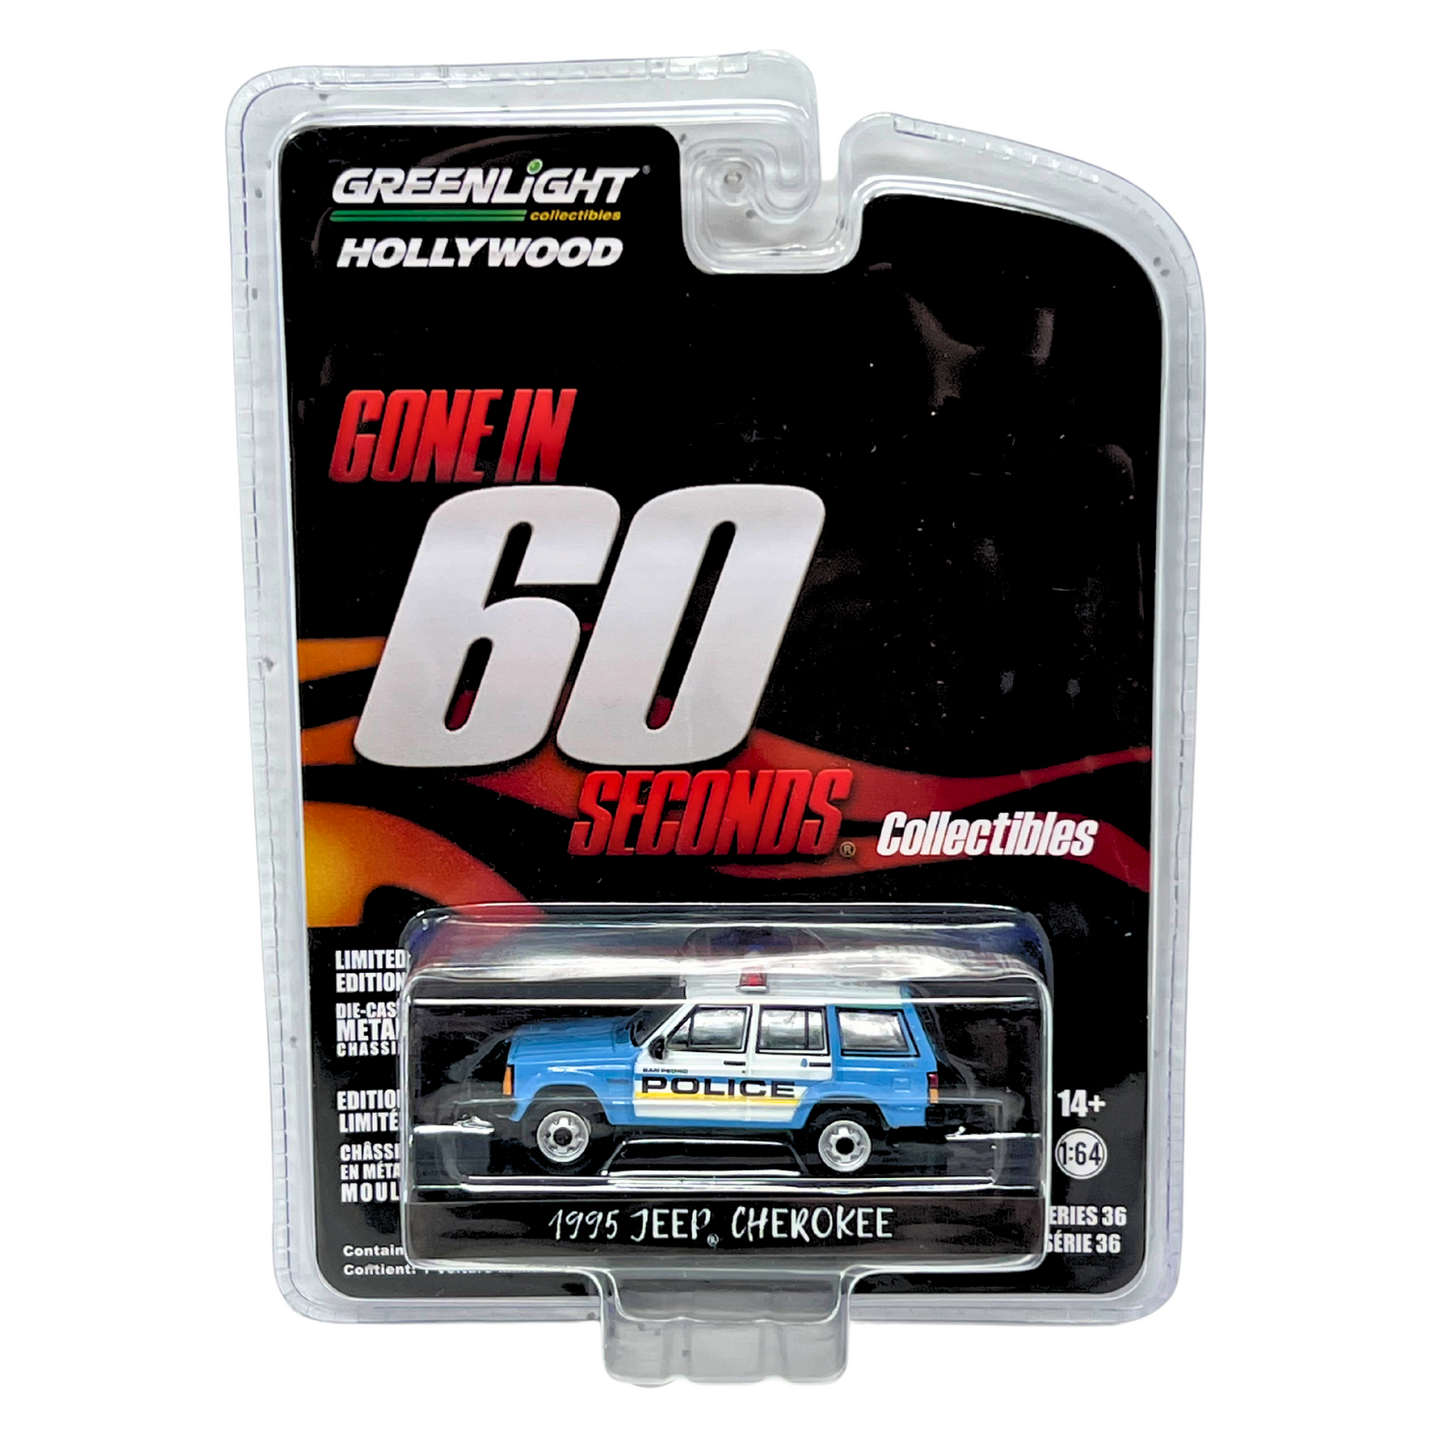 Greenlight Hollywood Gone in 60 Seconds 1995 Jeep Cherokee 1:64 Diecast